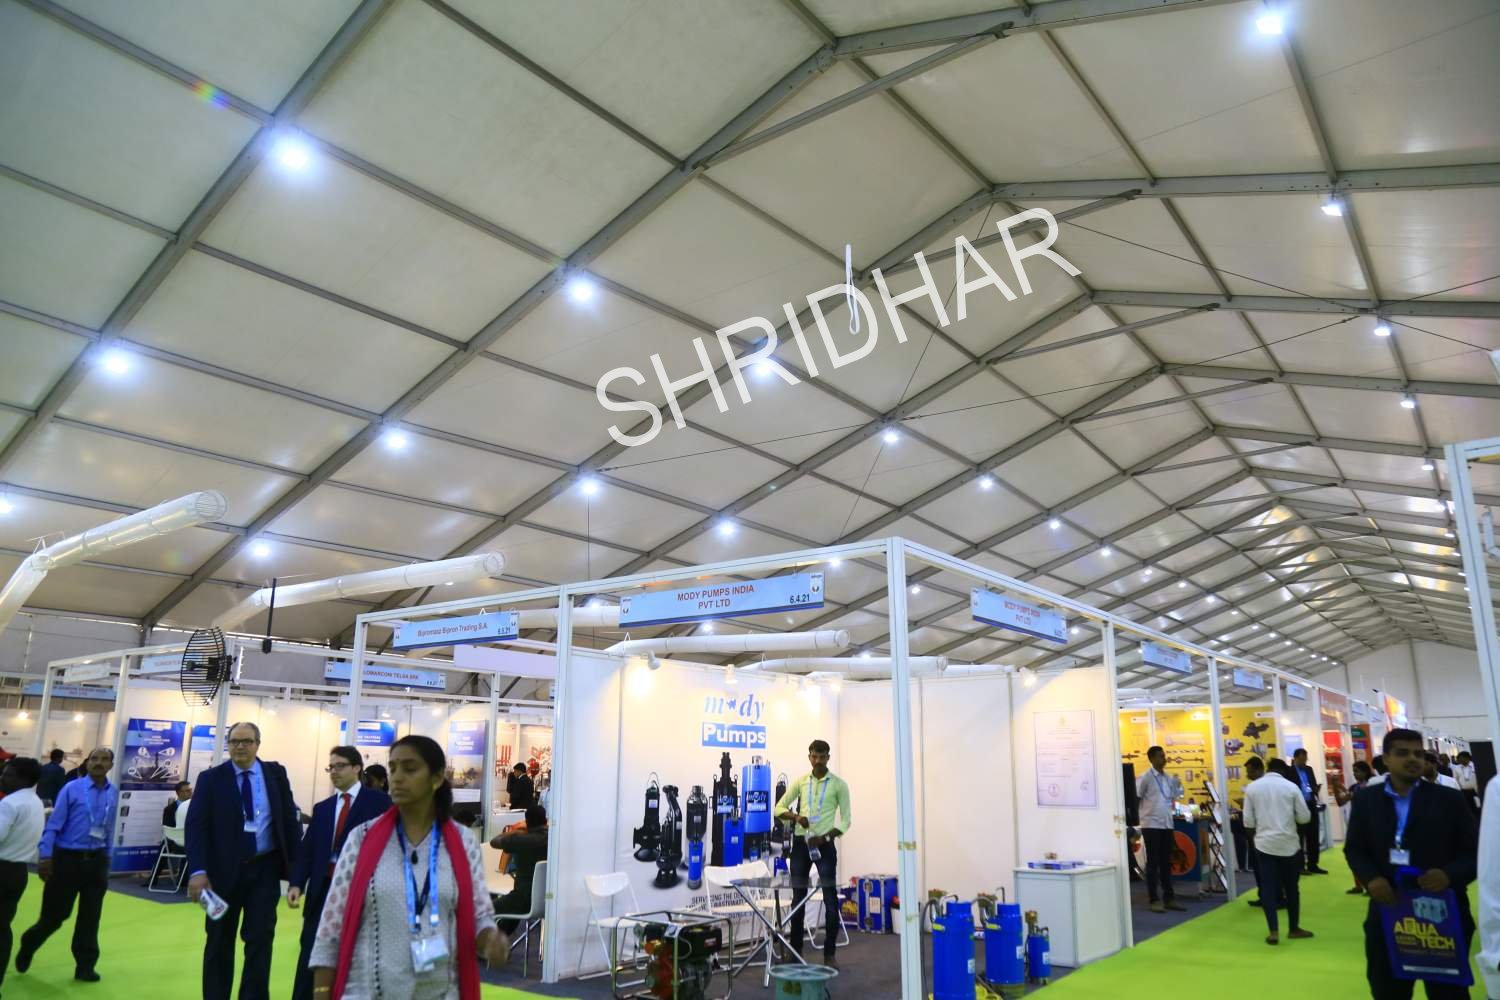 octanorm exhibition stalls for rent for hire in bangalore for events and exhibitions shridhar tent house